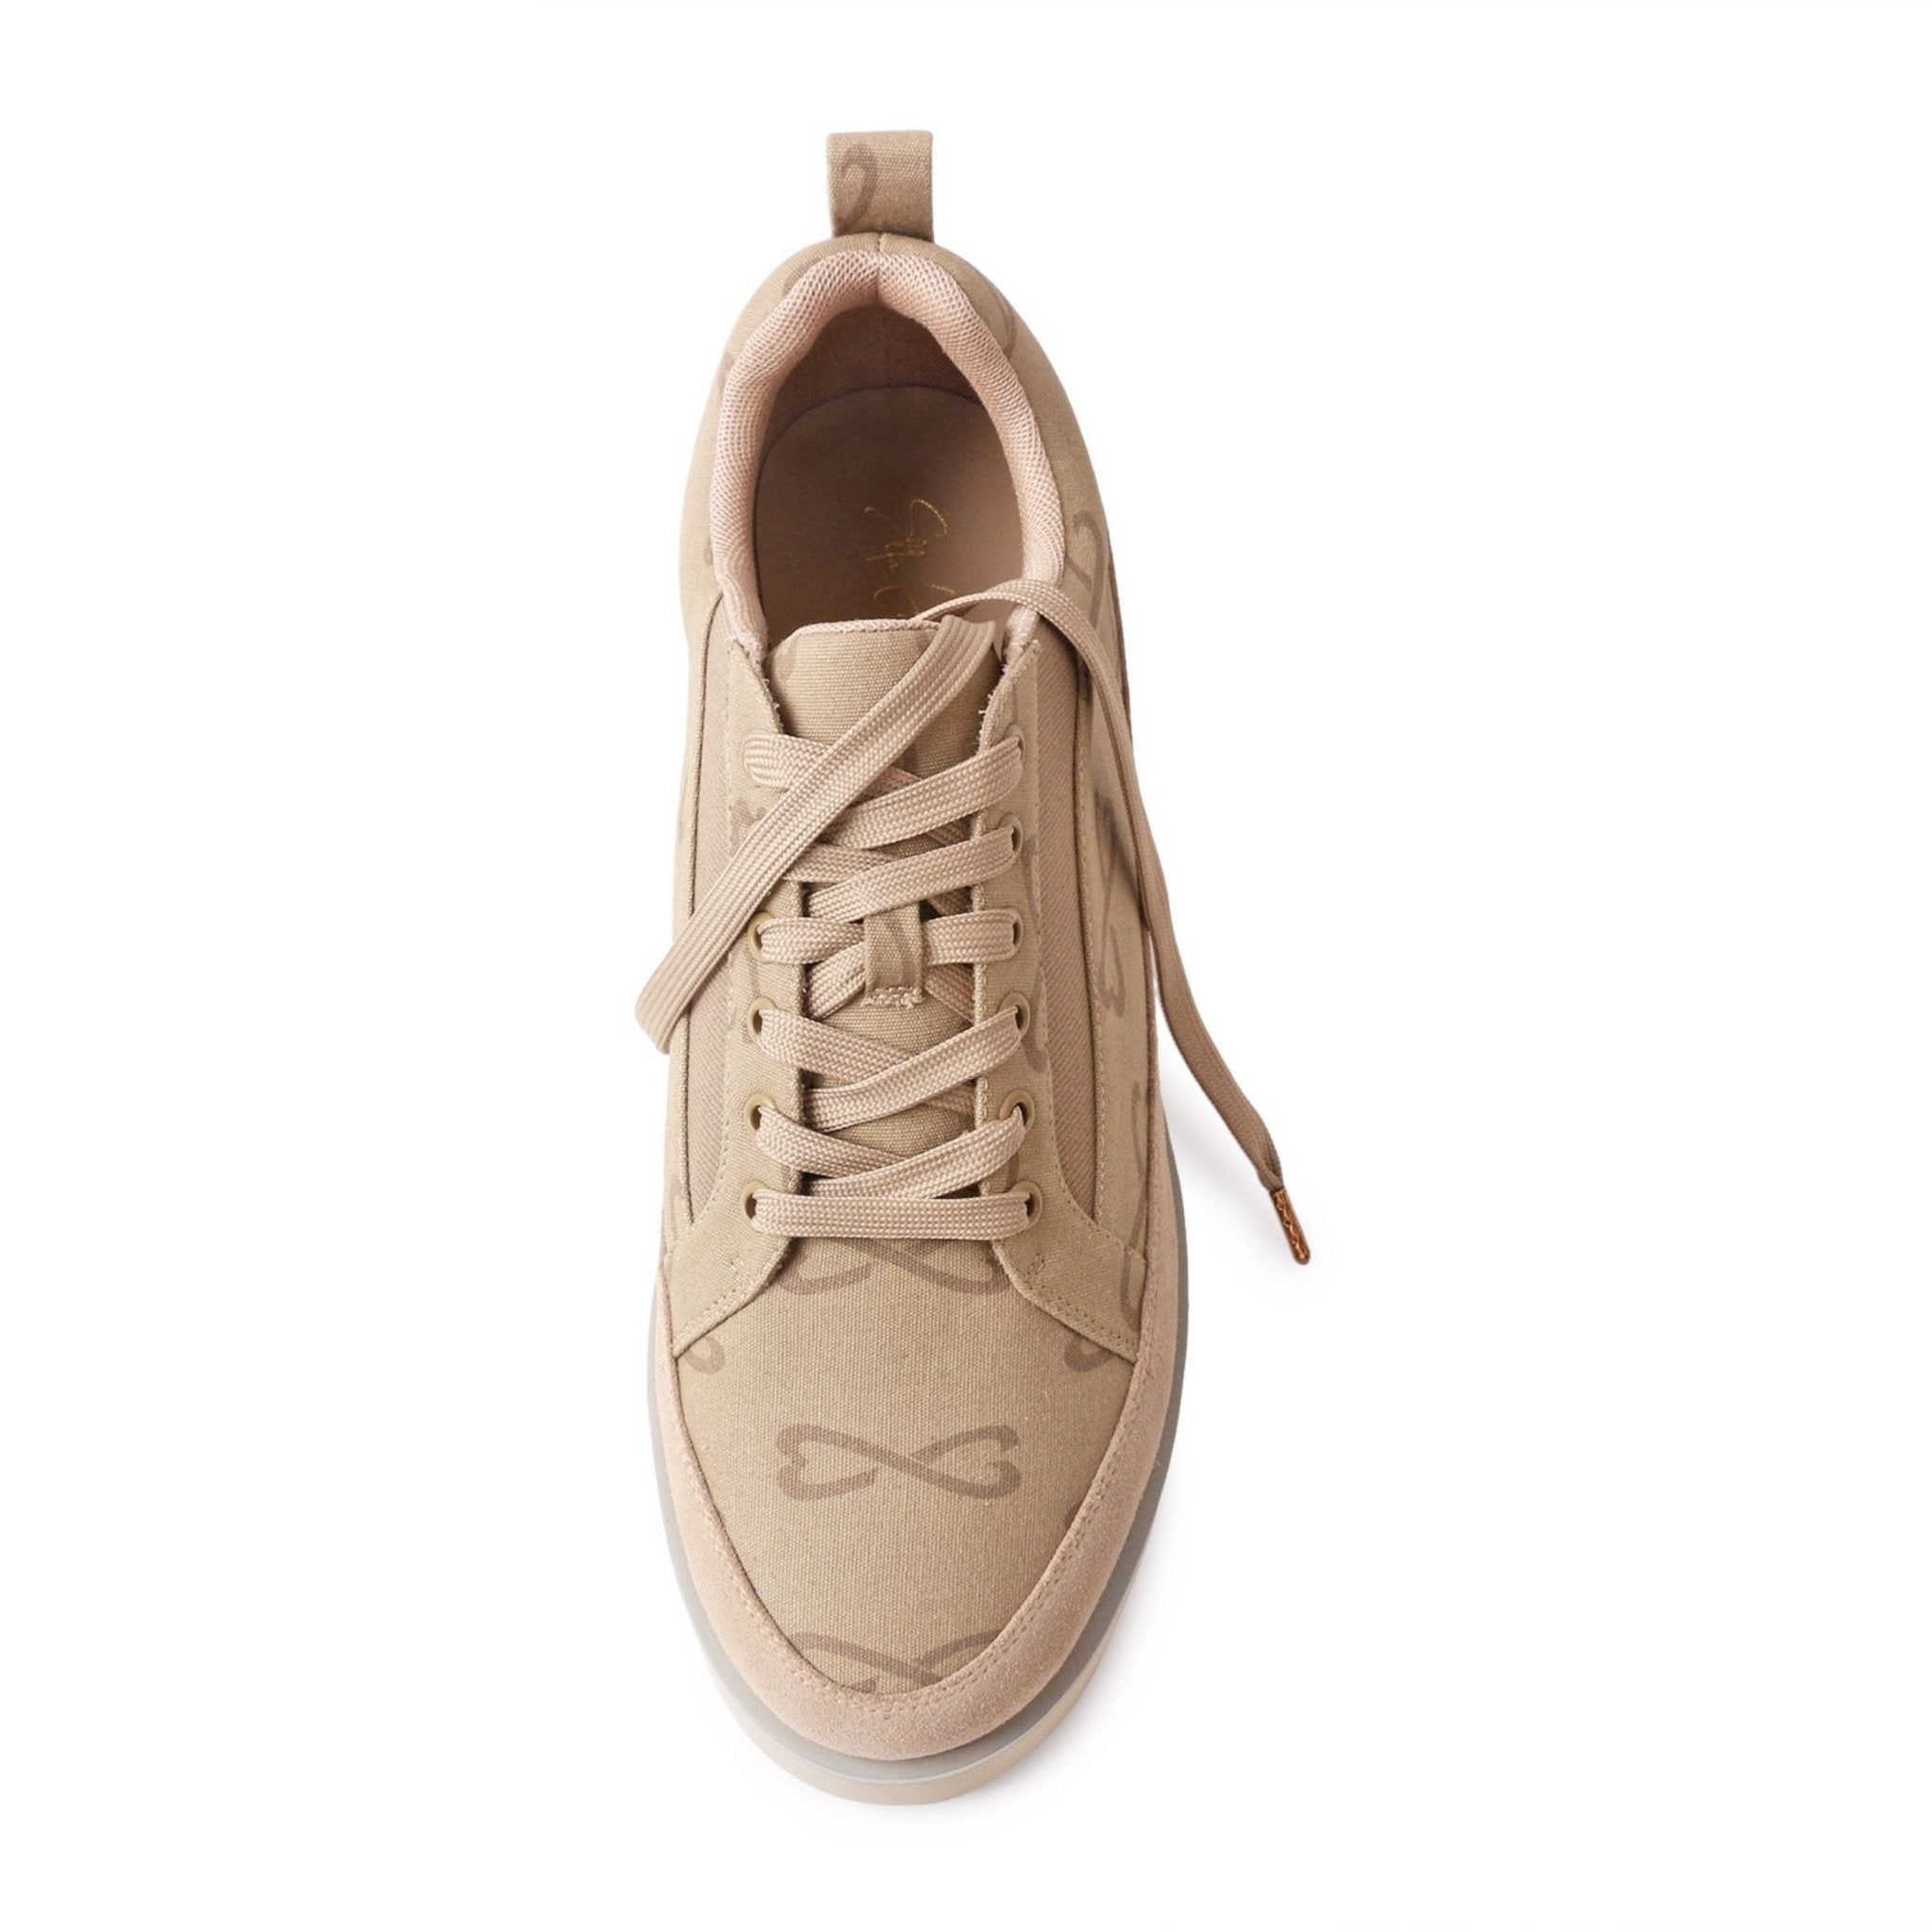 tan canvas suede sneaker large sizes